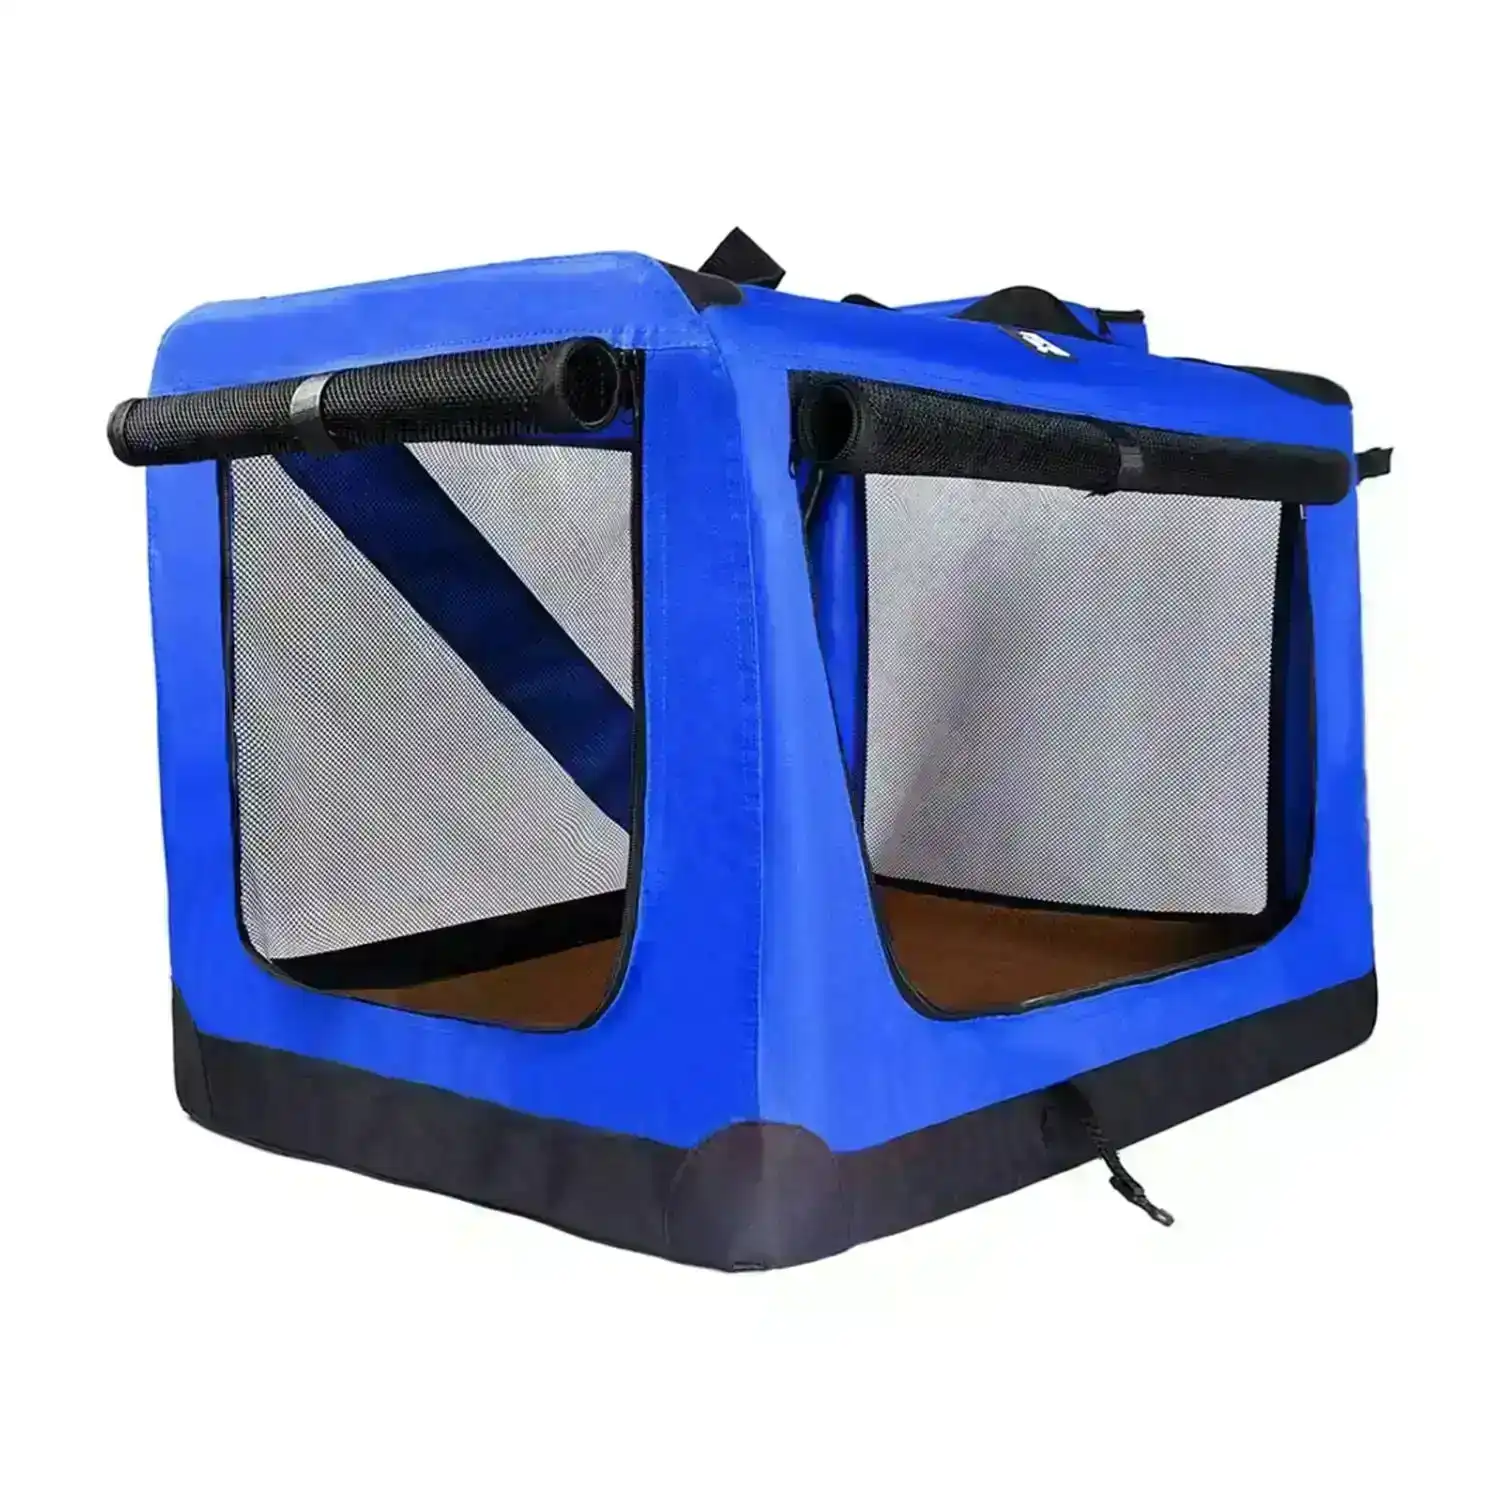 Floofi Lightweight Portable Pet Carrier with Removable Cover Extra Large Blue